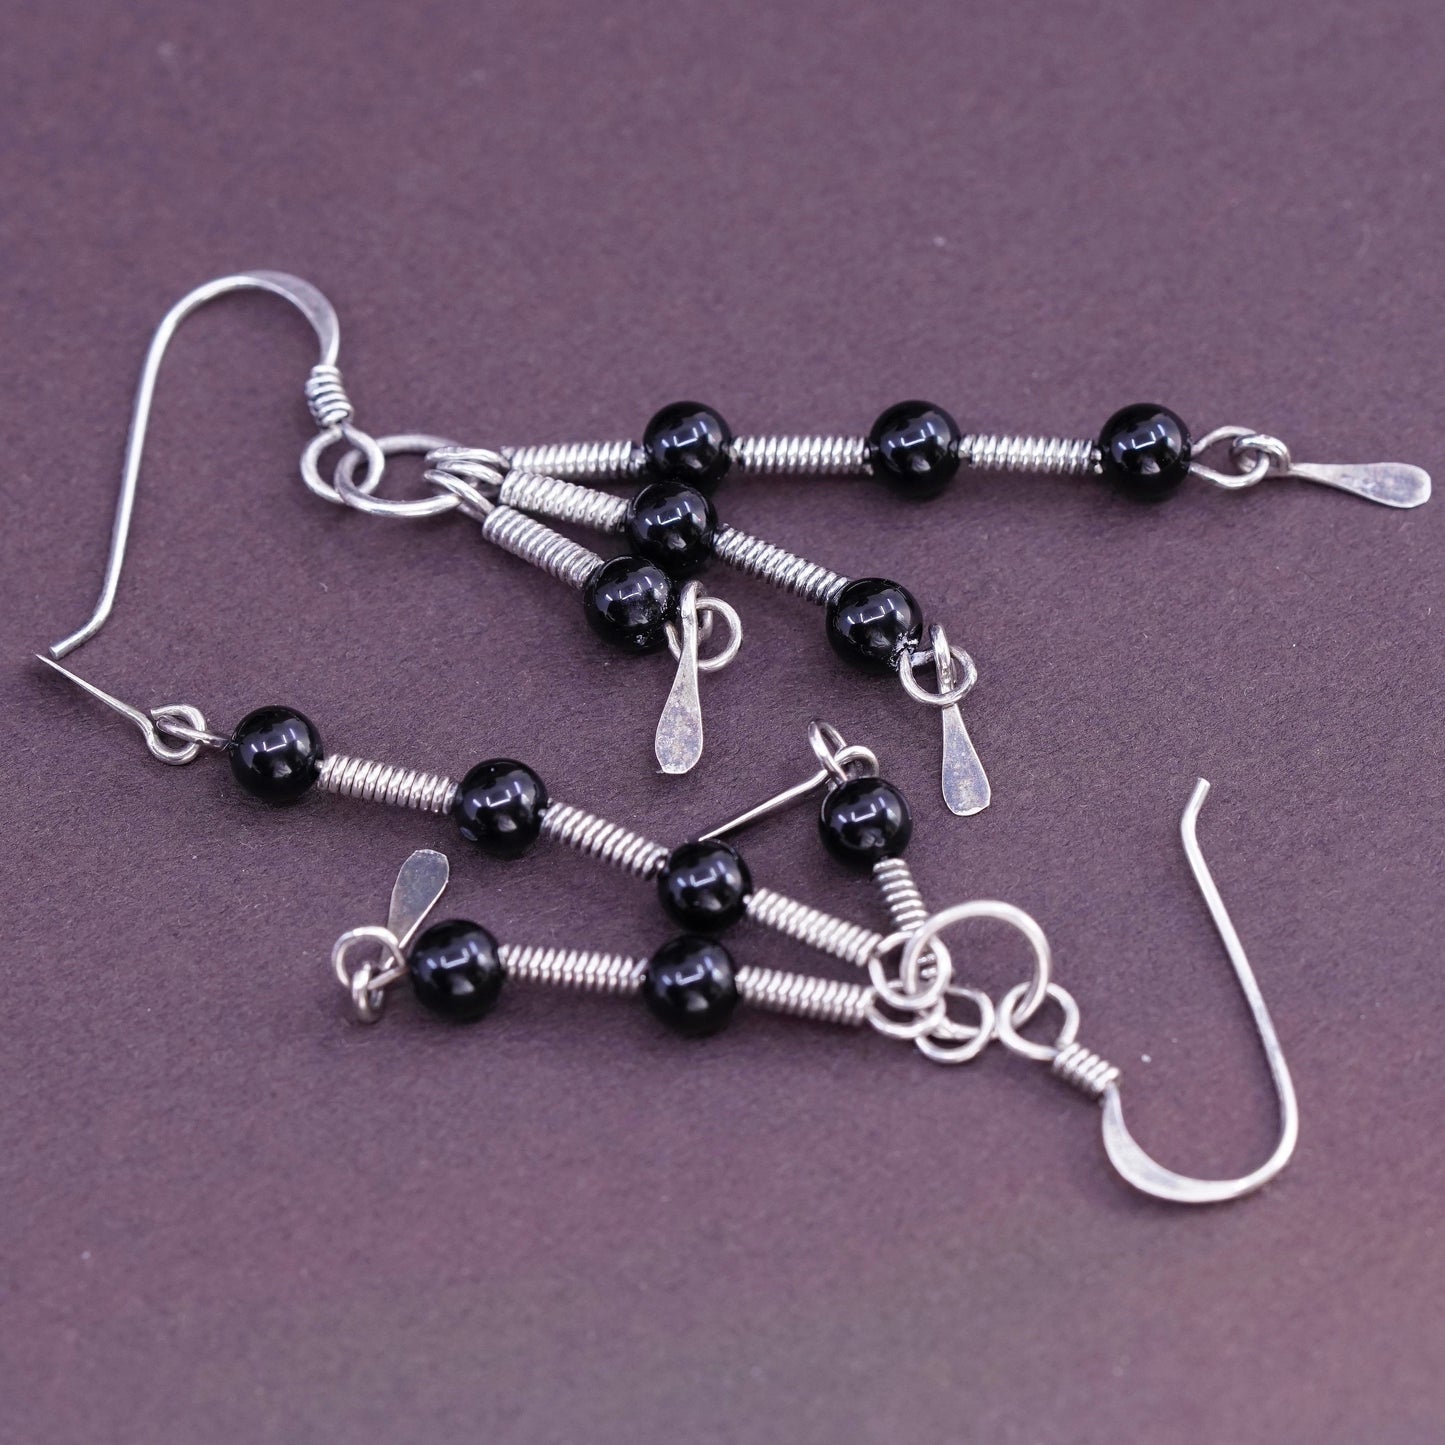 Vintage Sterling silver handmade earrings, Mexico 925 with bead obsidian